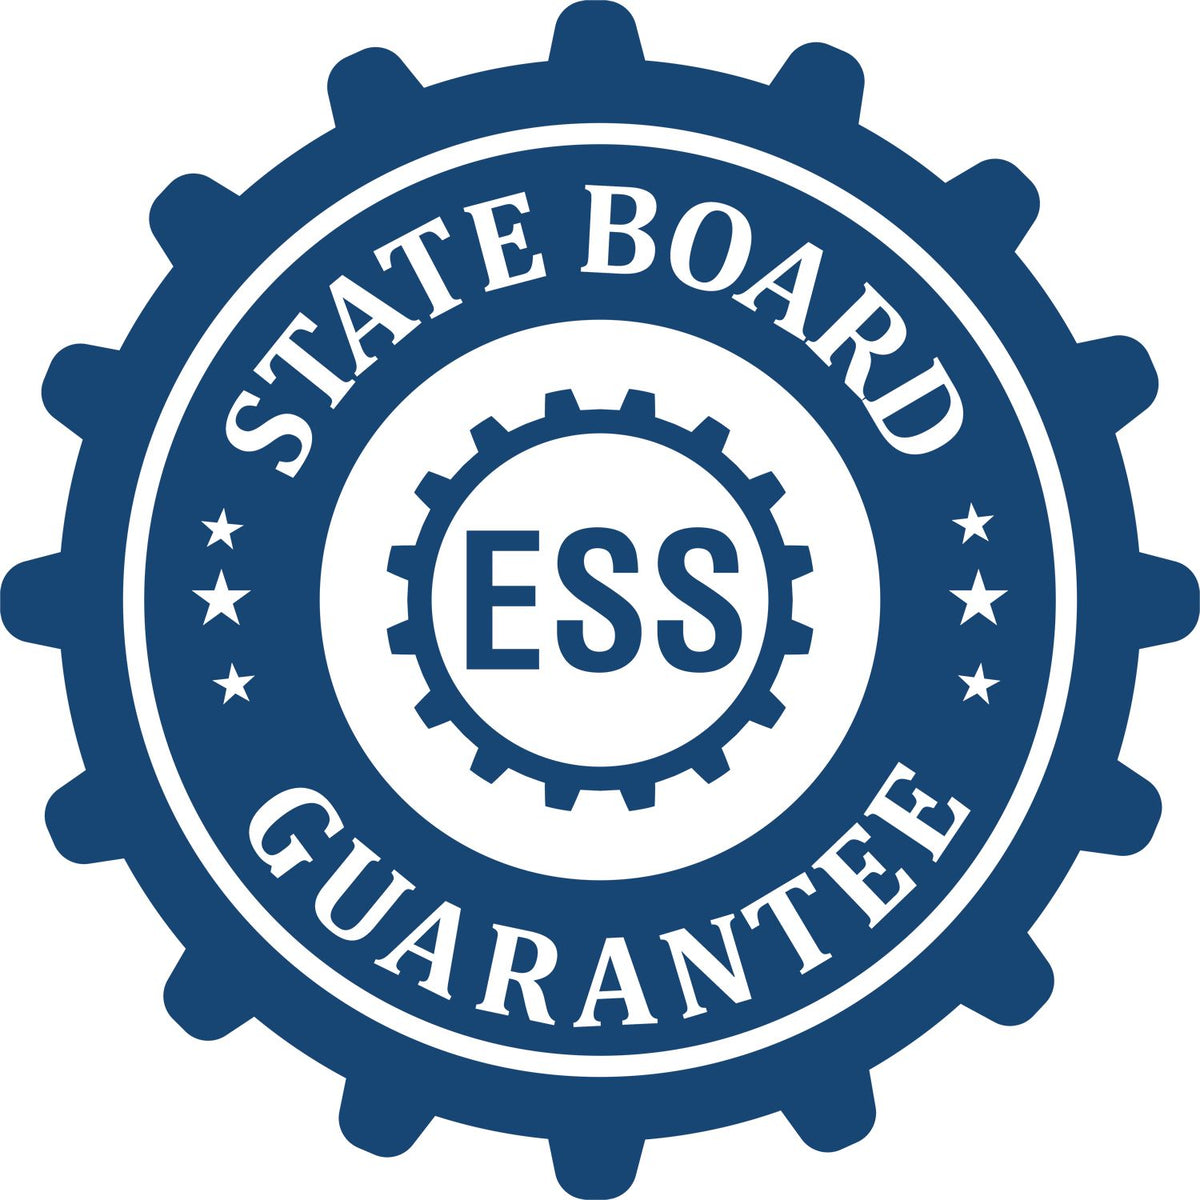 An emblem in a gear shape illustrating a state board guarantee for the Digital Utah PE Stamp and Electronic Seal for Utah Engineer product.